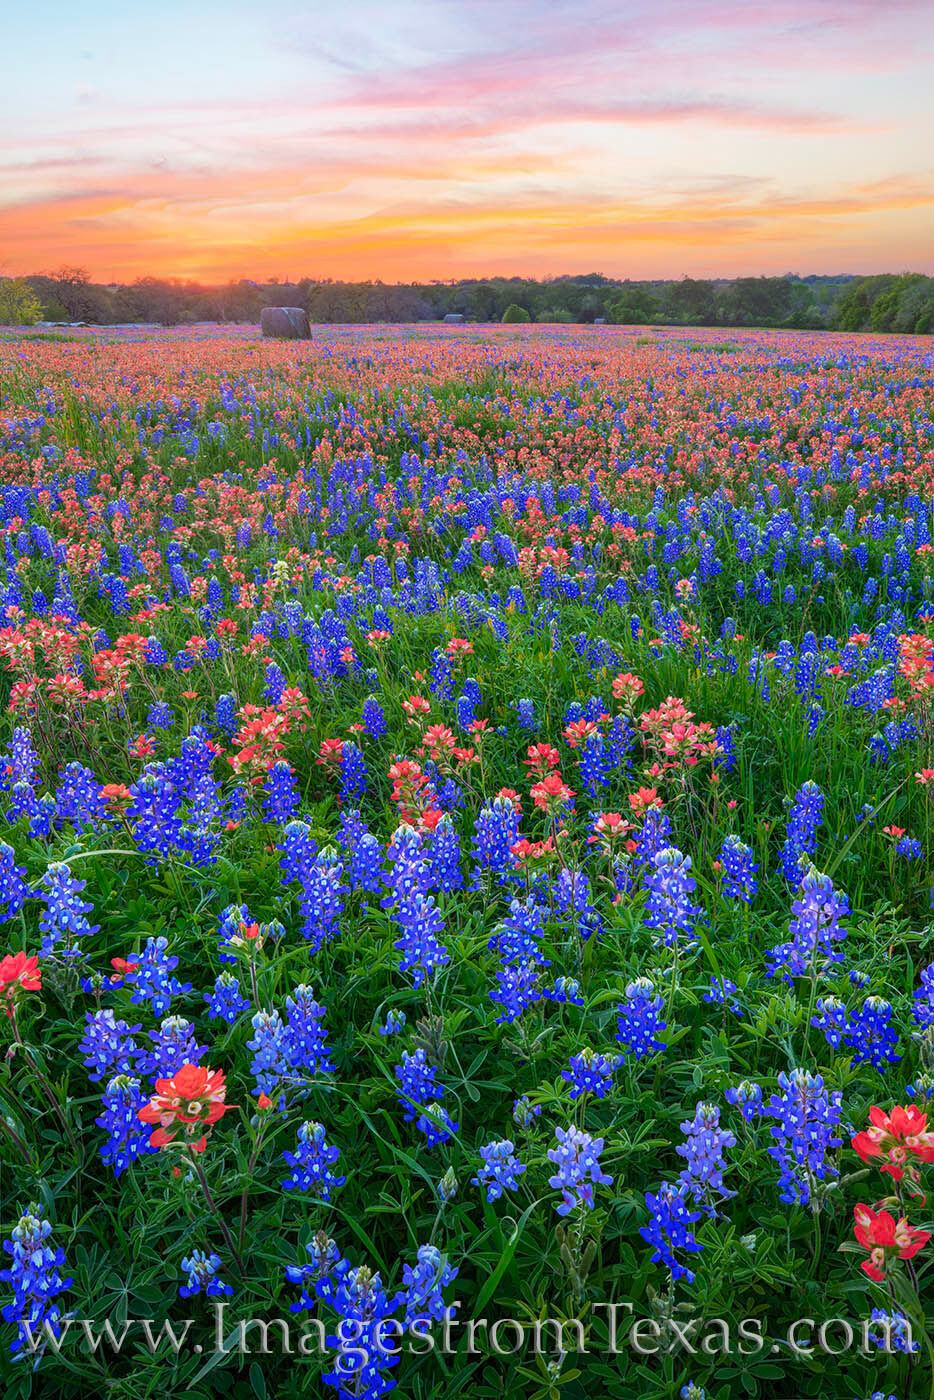 About fifteen minutes after sunset, the sky turned nice shades of orange and pink for a very short time. In the foreground, bluebonnets...